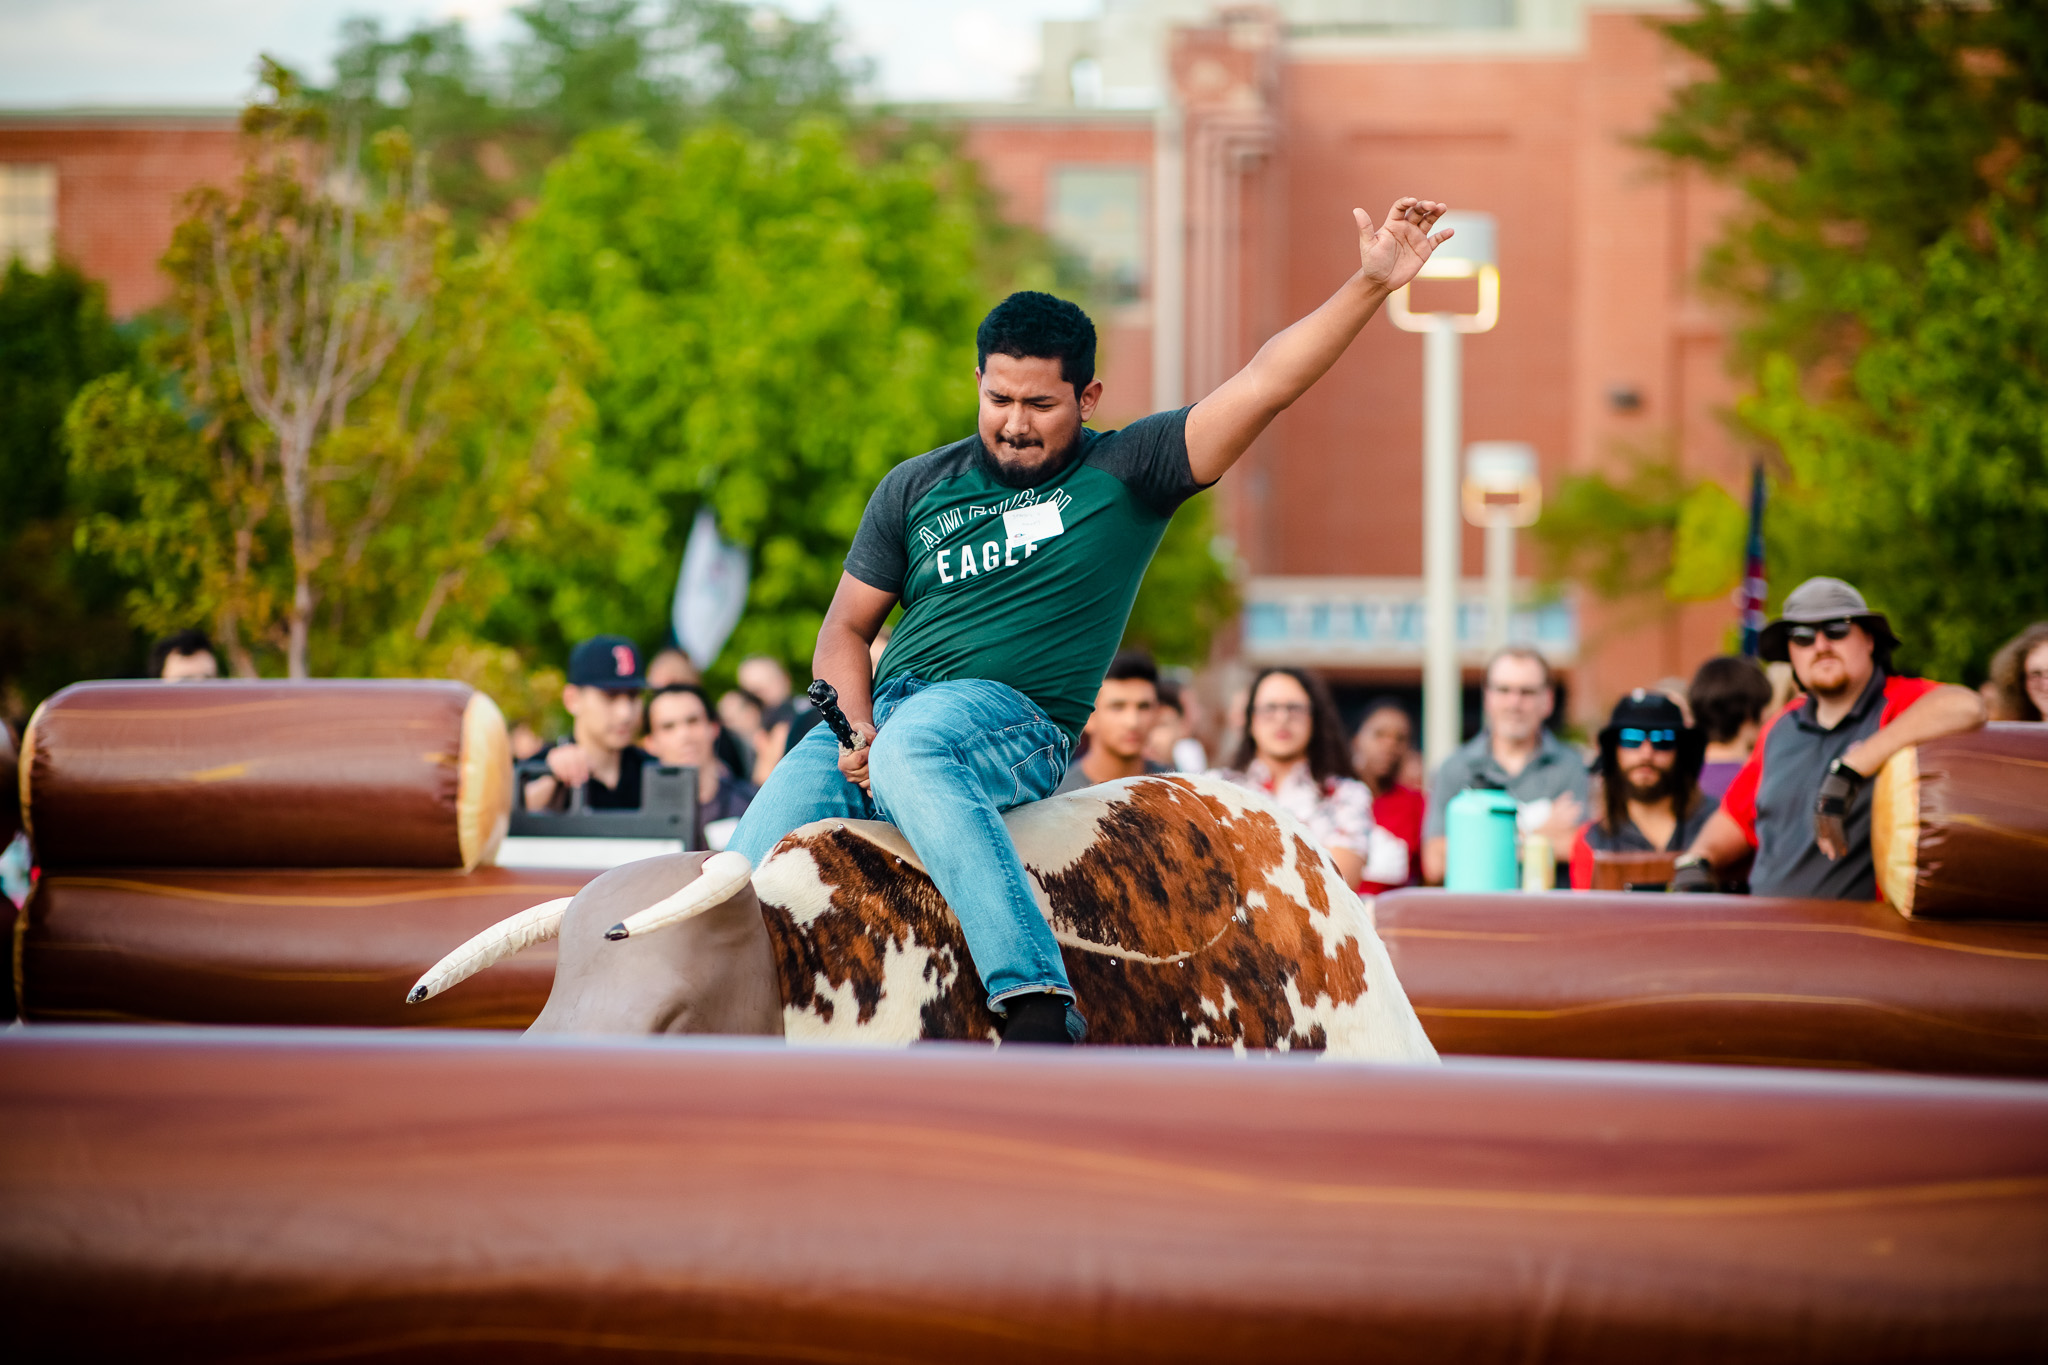 Student on the mechanical bull at convocation